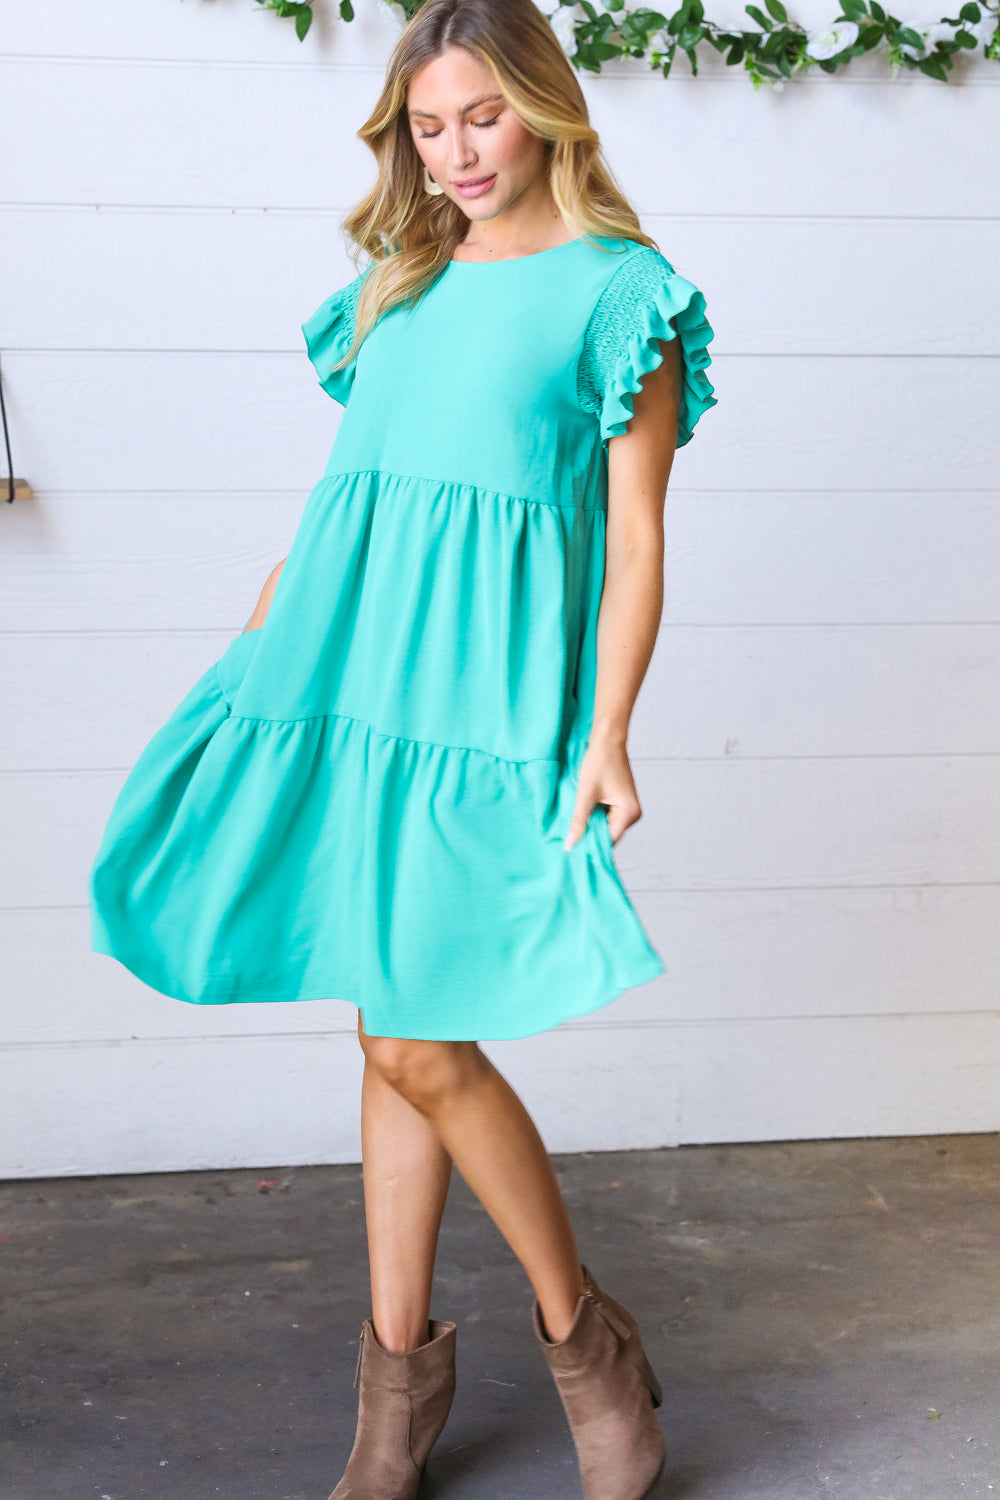 FINAL SALE - Turquoise Beauty Tiered Dress